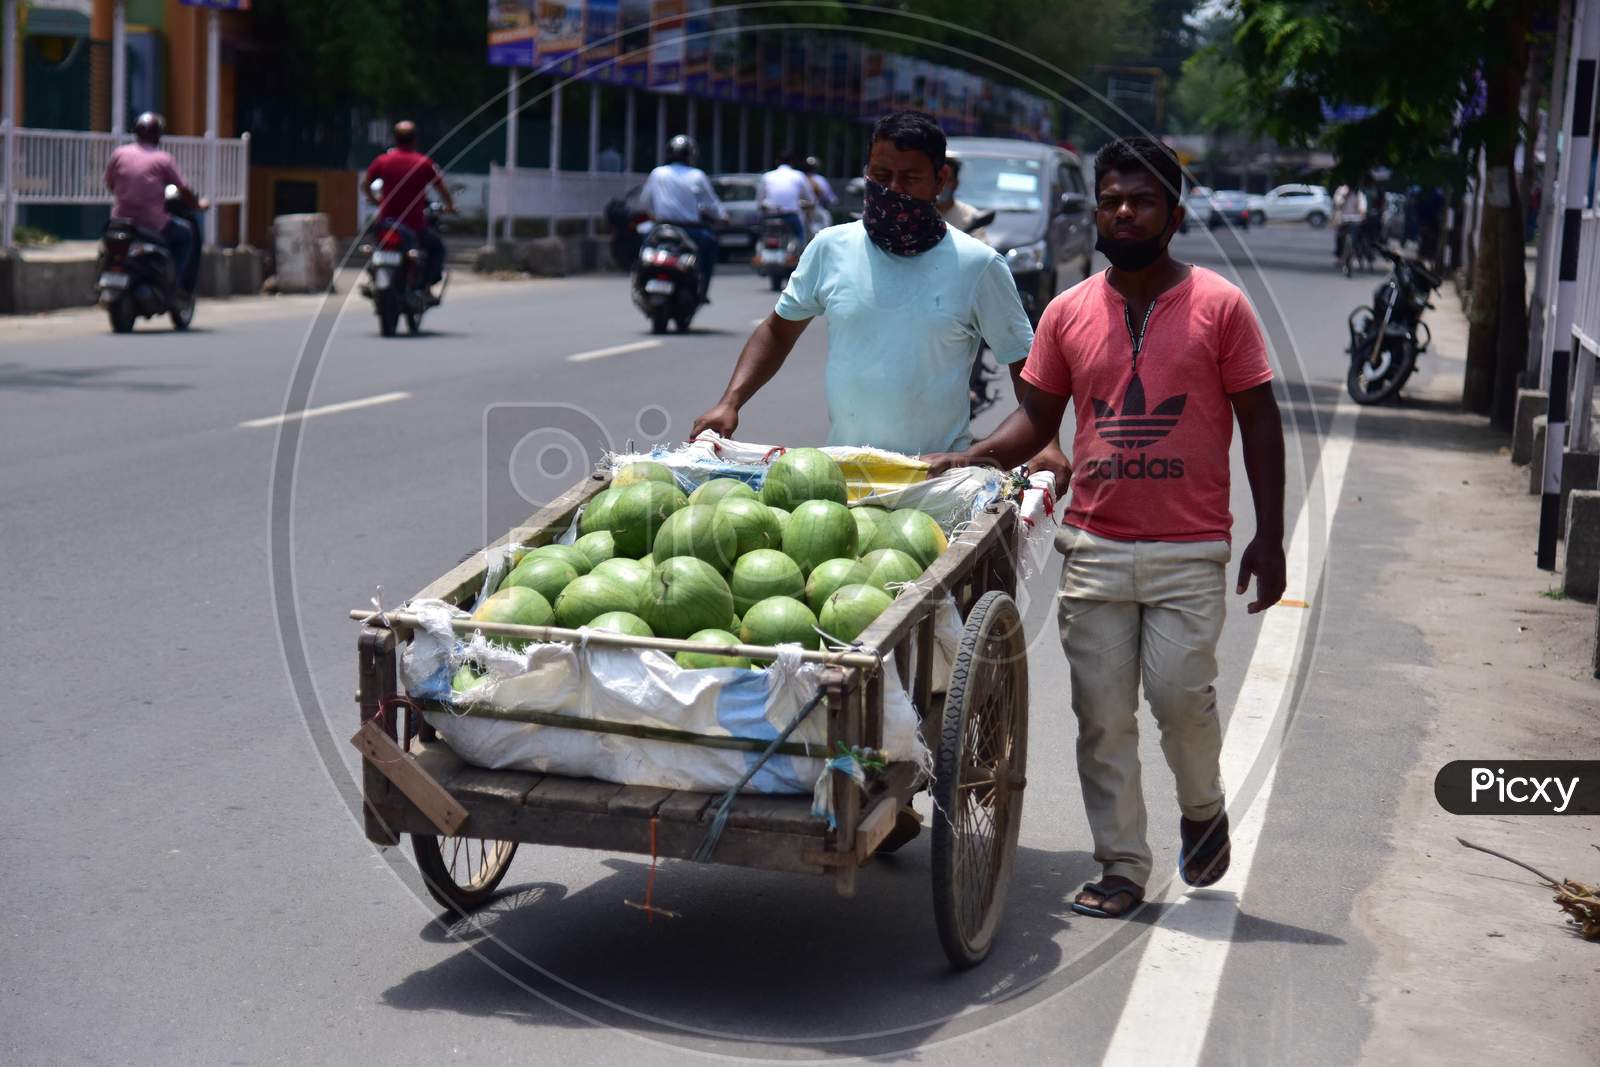 Nagaon :Vendor Carry Watermelon  On His Cart After Authorities Allowed Sale  With Certain Restrictions, During The Ongoing Covid-19 Nationwide Lockdown In Nagaon District Of Assam On May 04,2020 ..Pix By Anuwar Hazarika